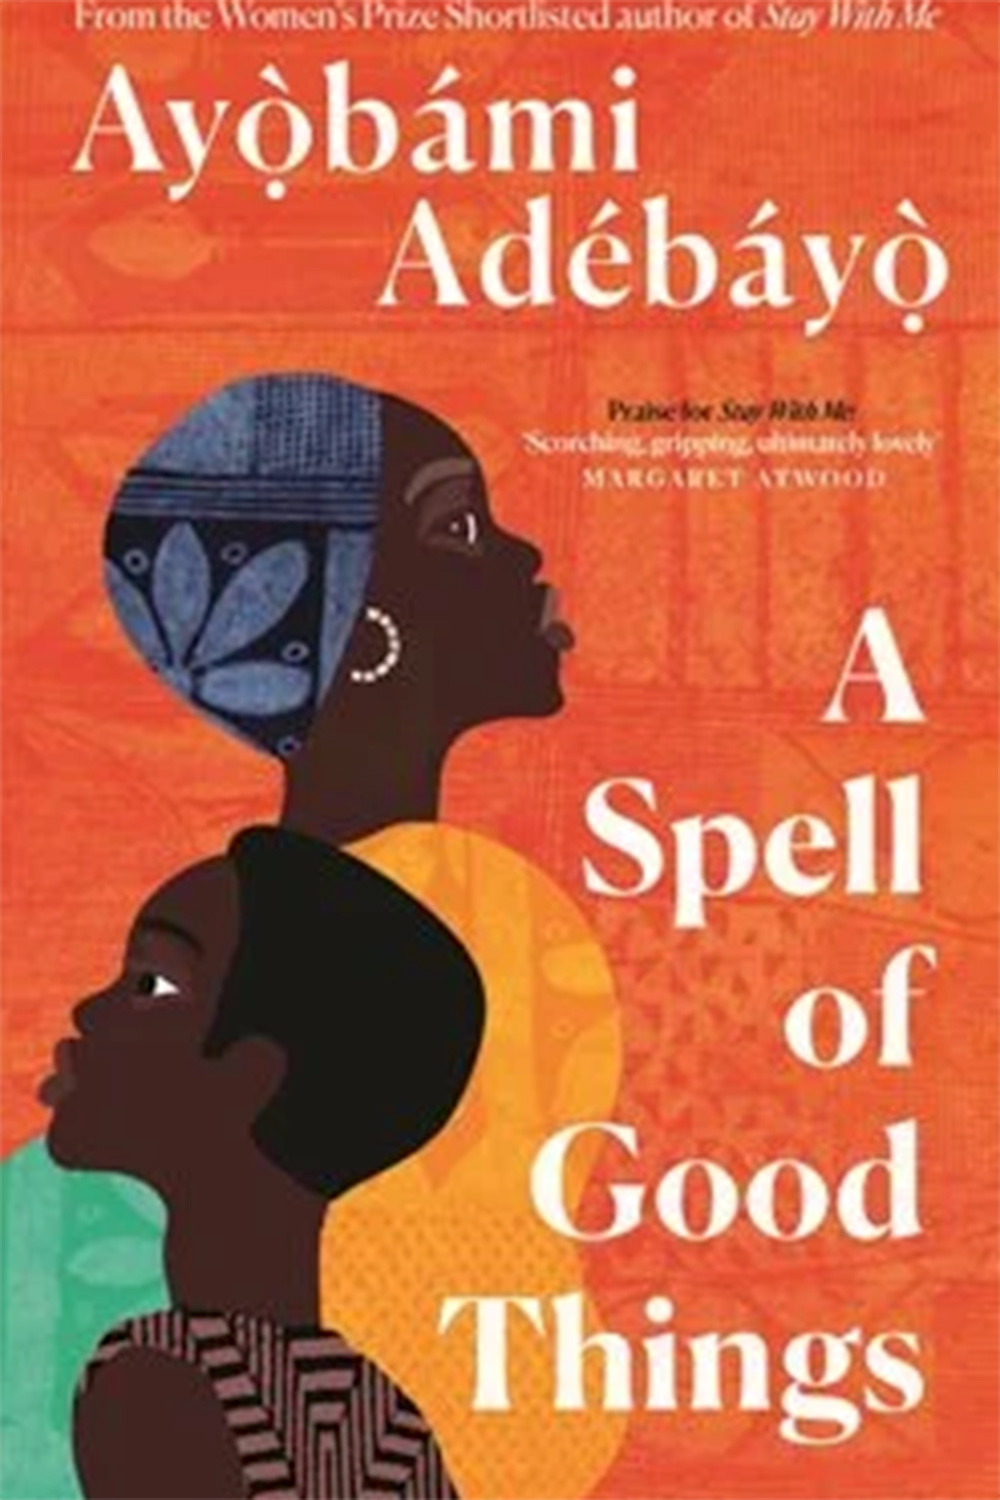 The front cover of Ayobami Adebayo